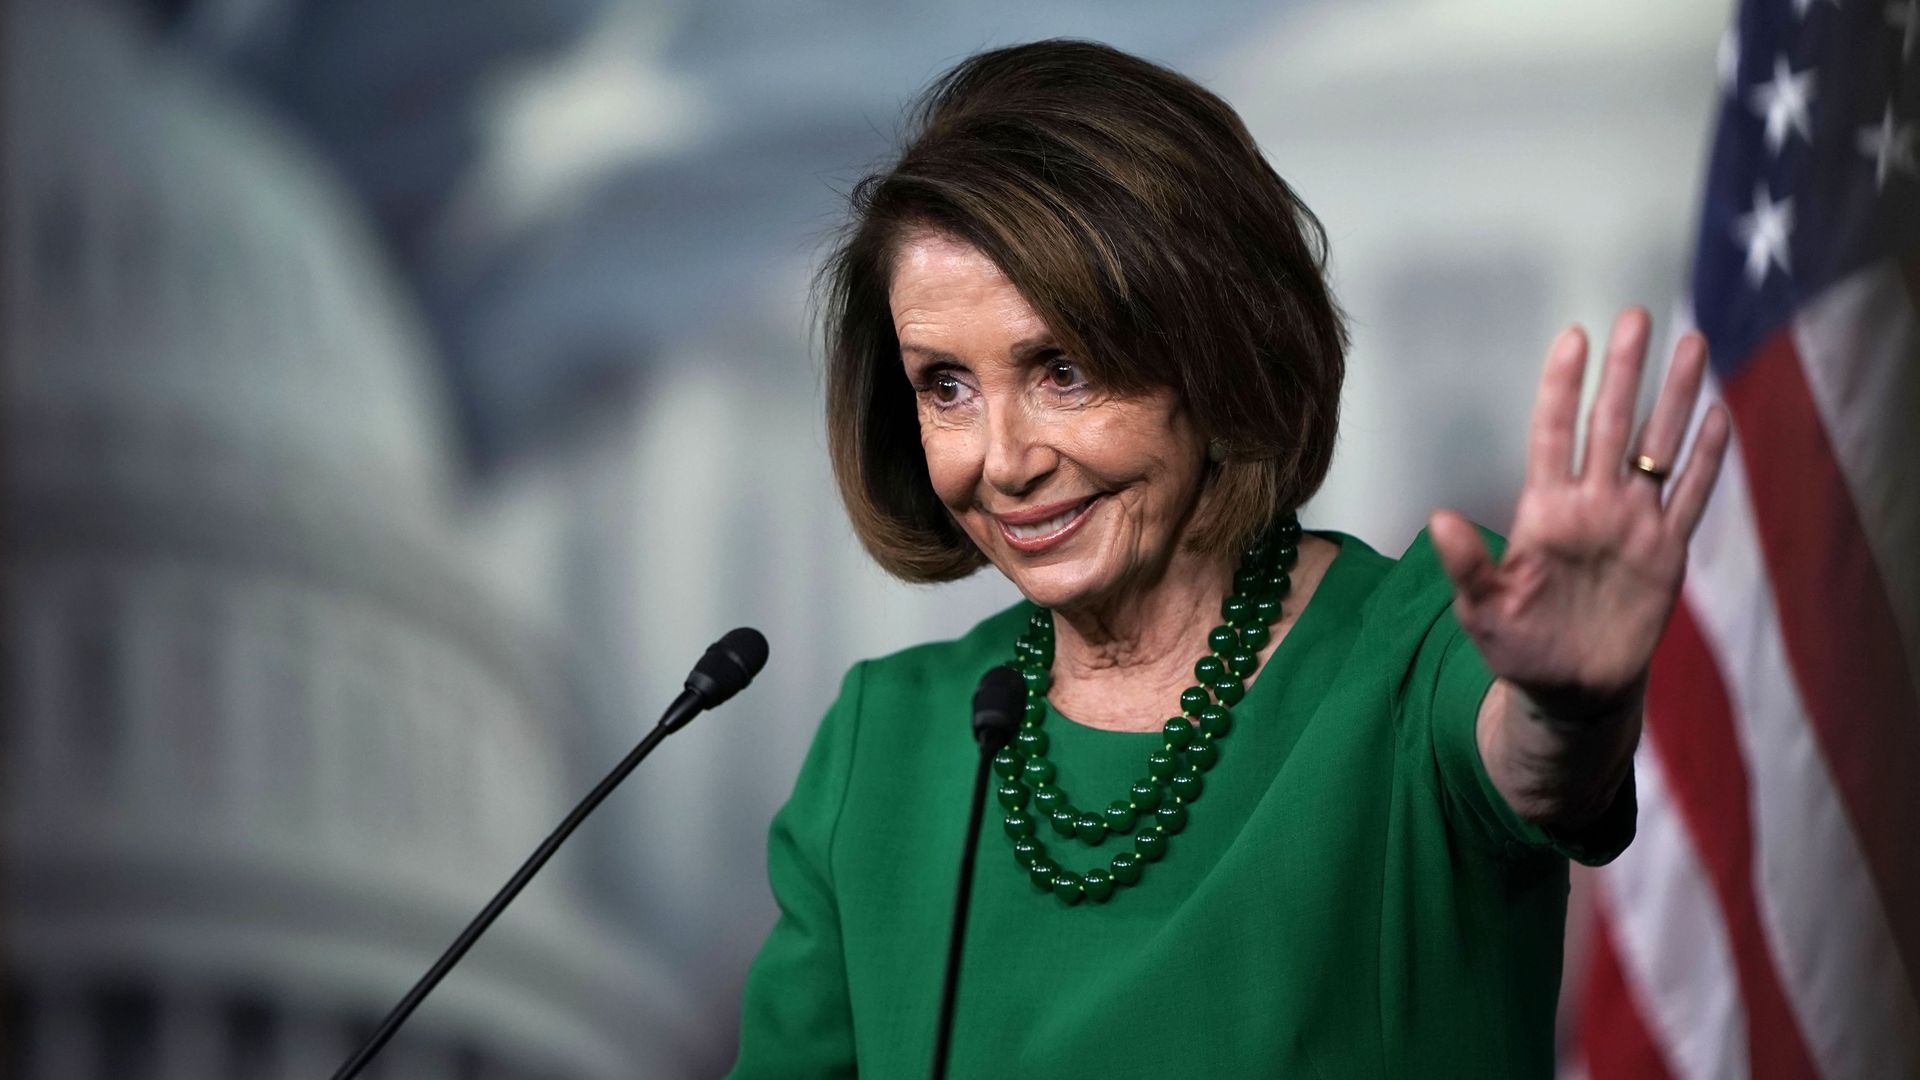 Nancy Pelosi to support term limits for Democratic leaders